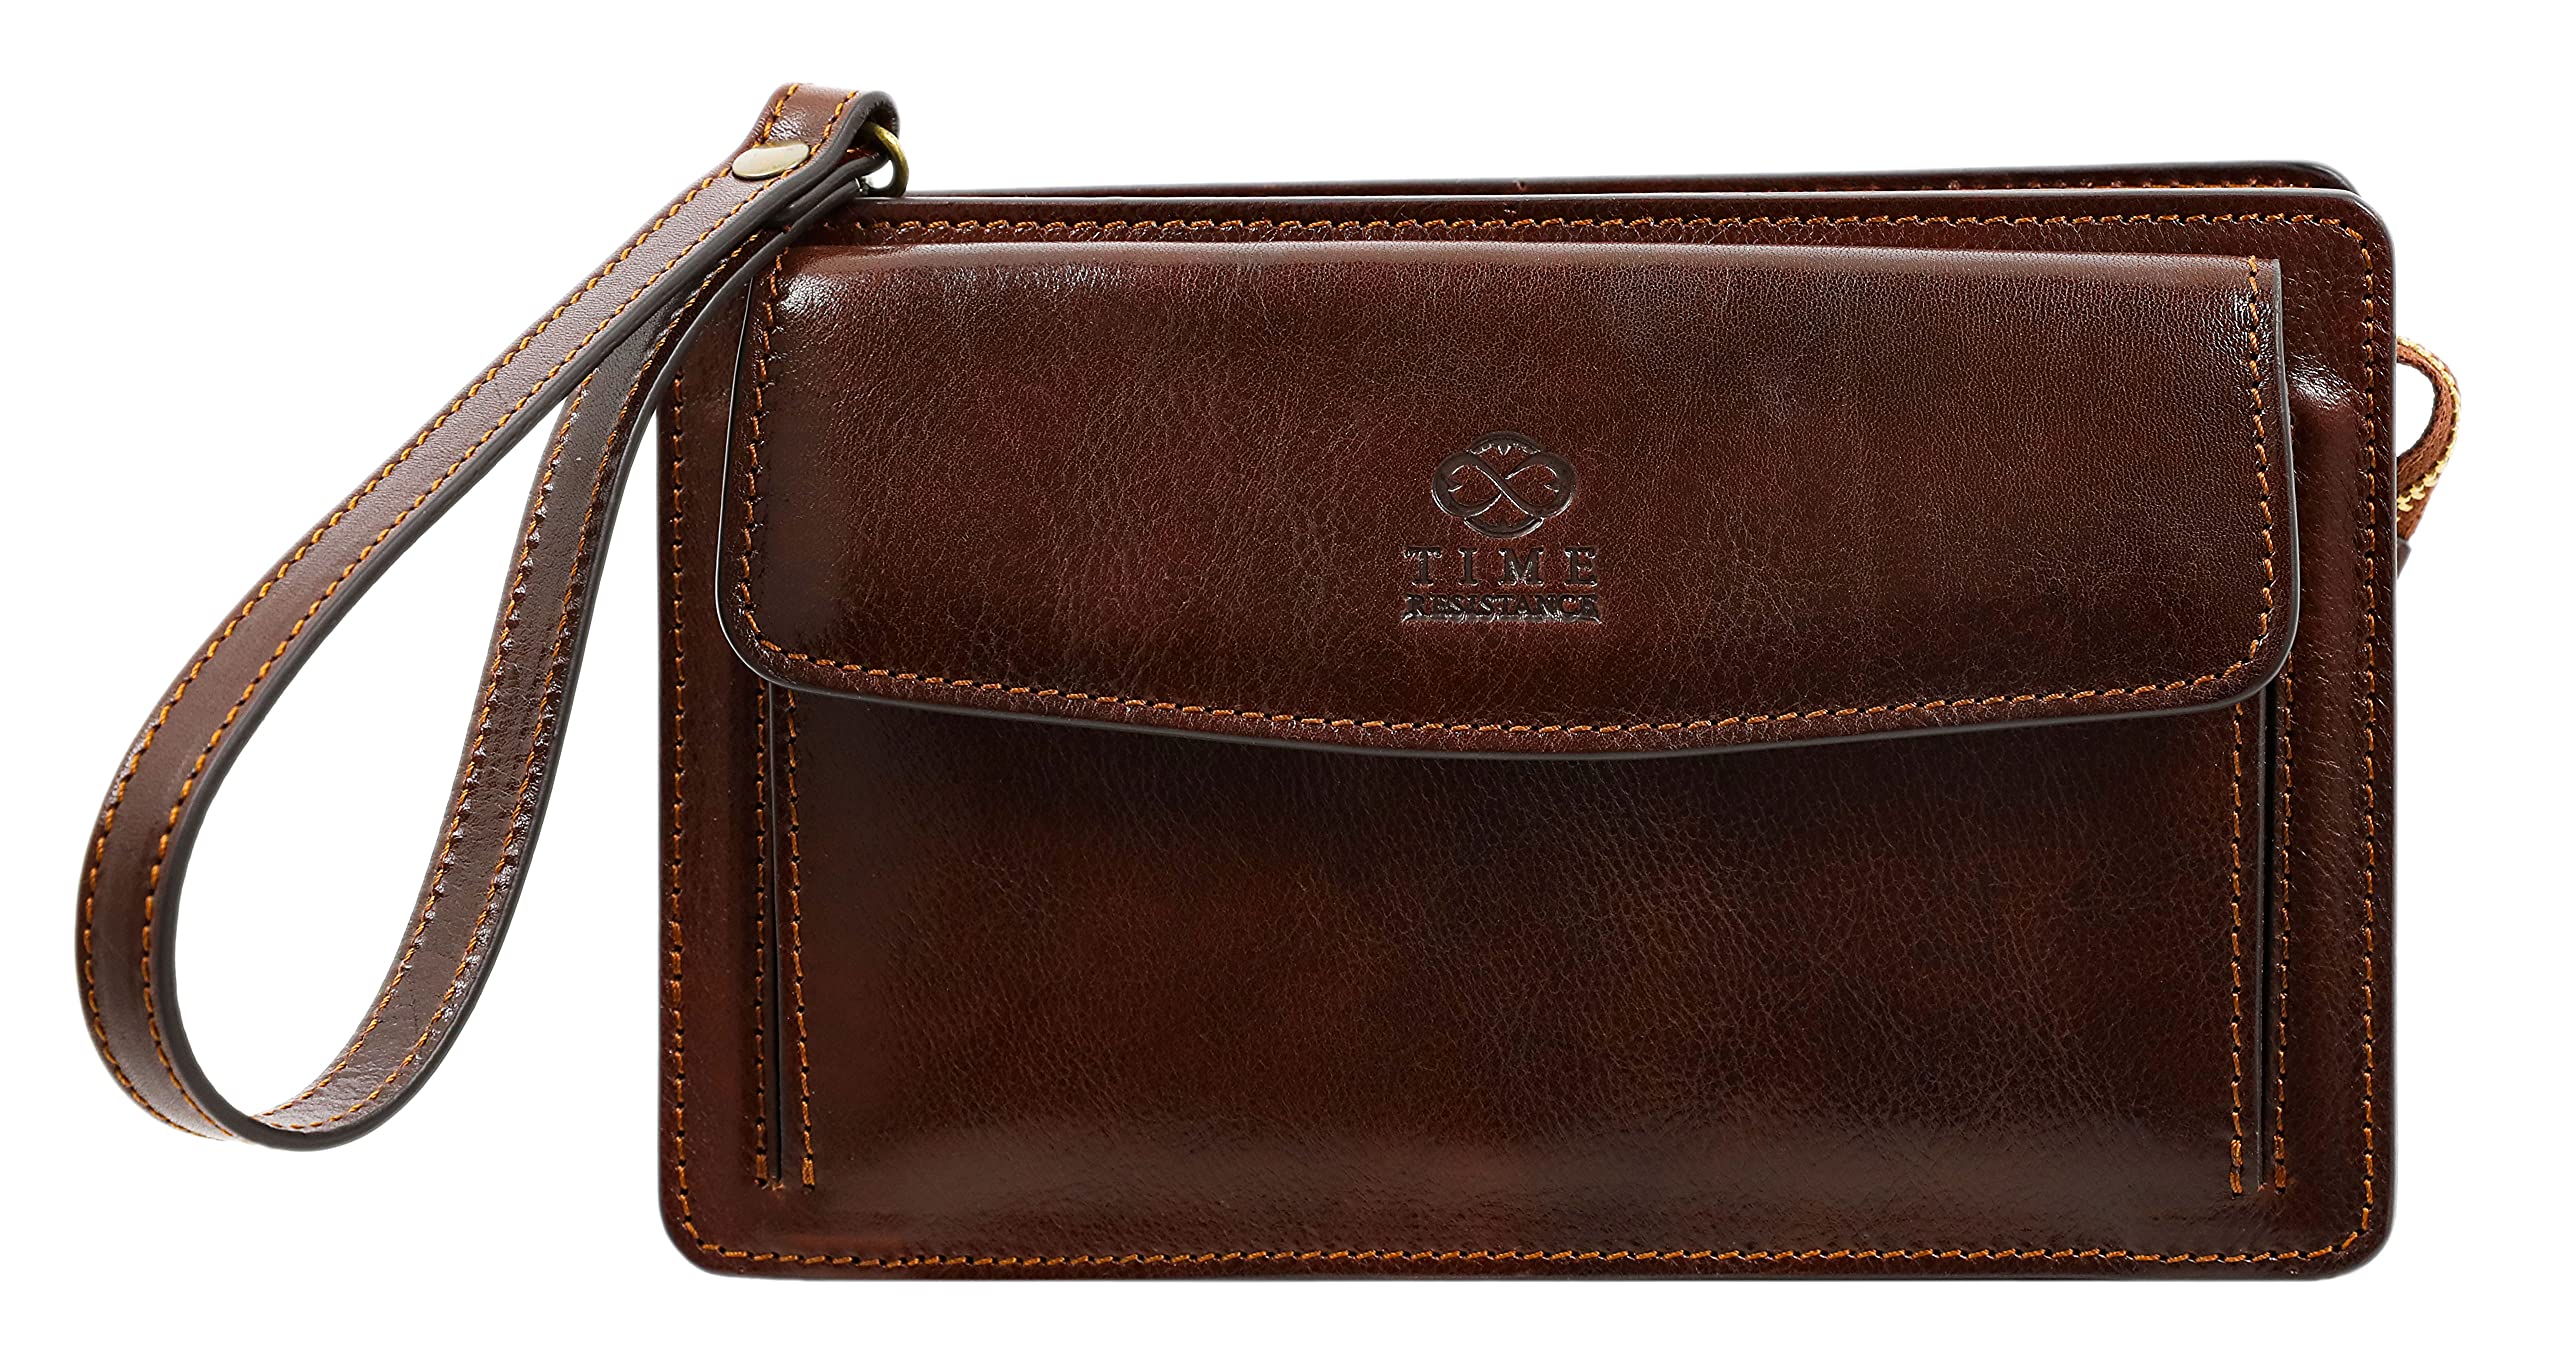 Denis Exclusive leather handy wrist bag for man